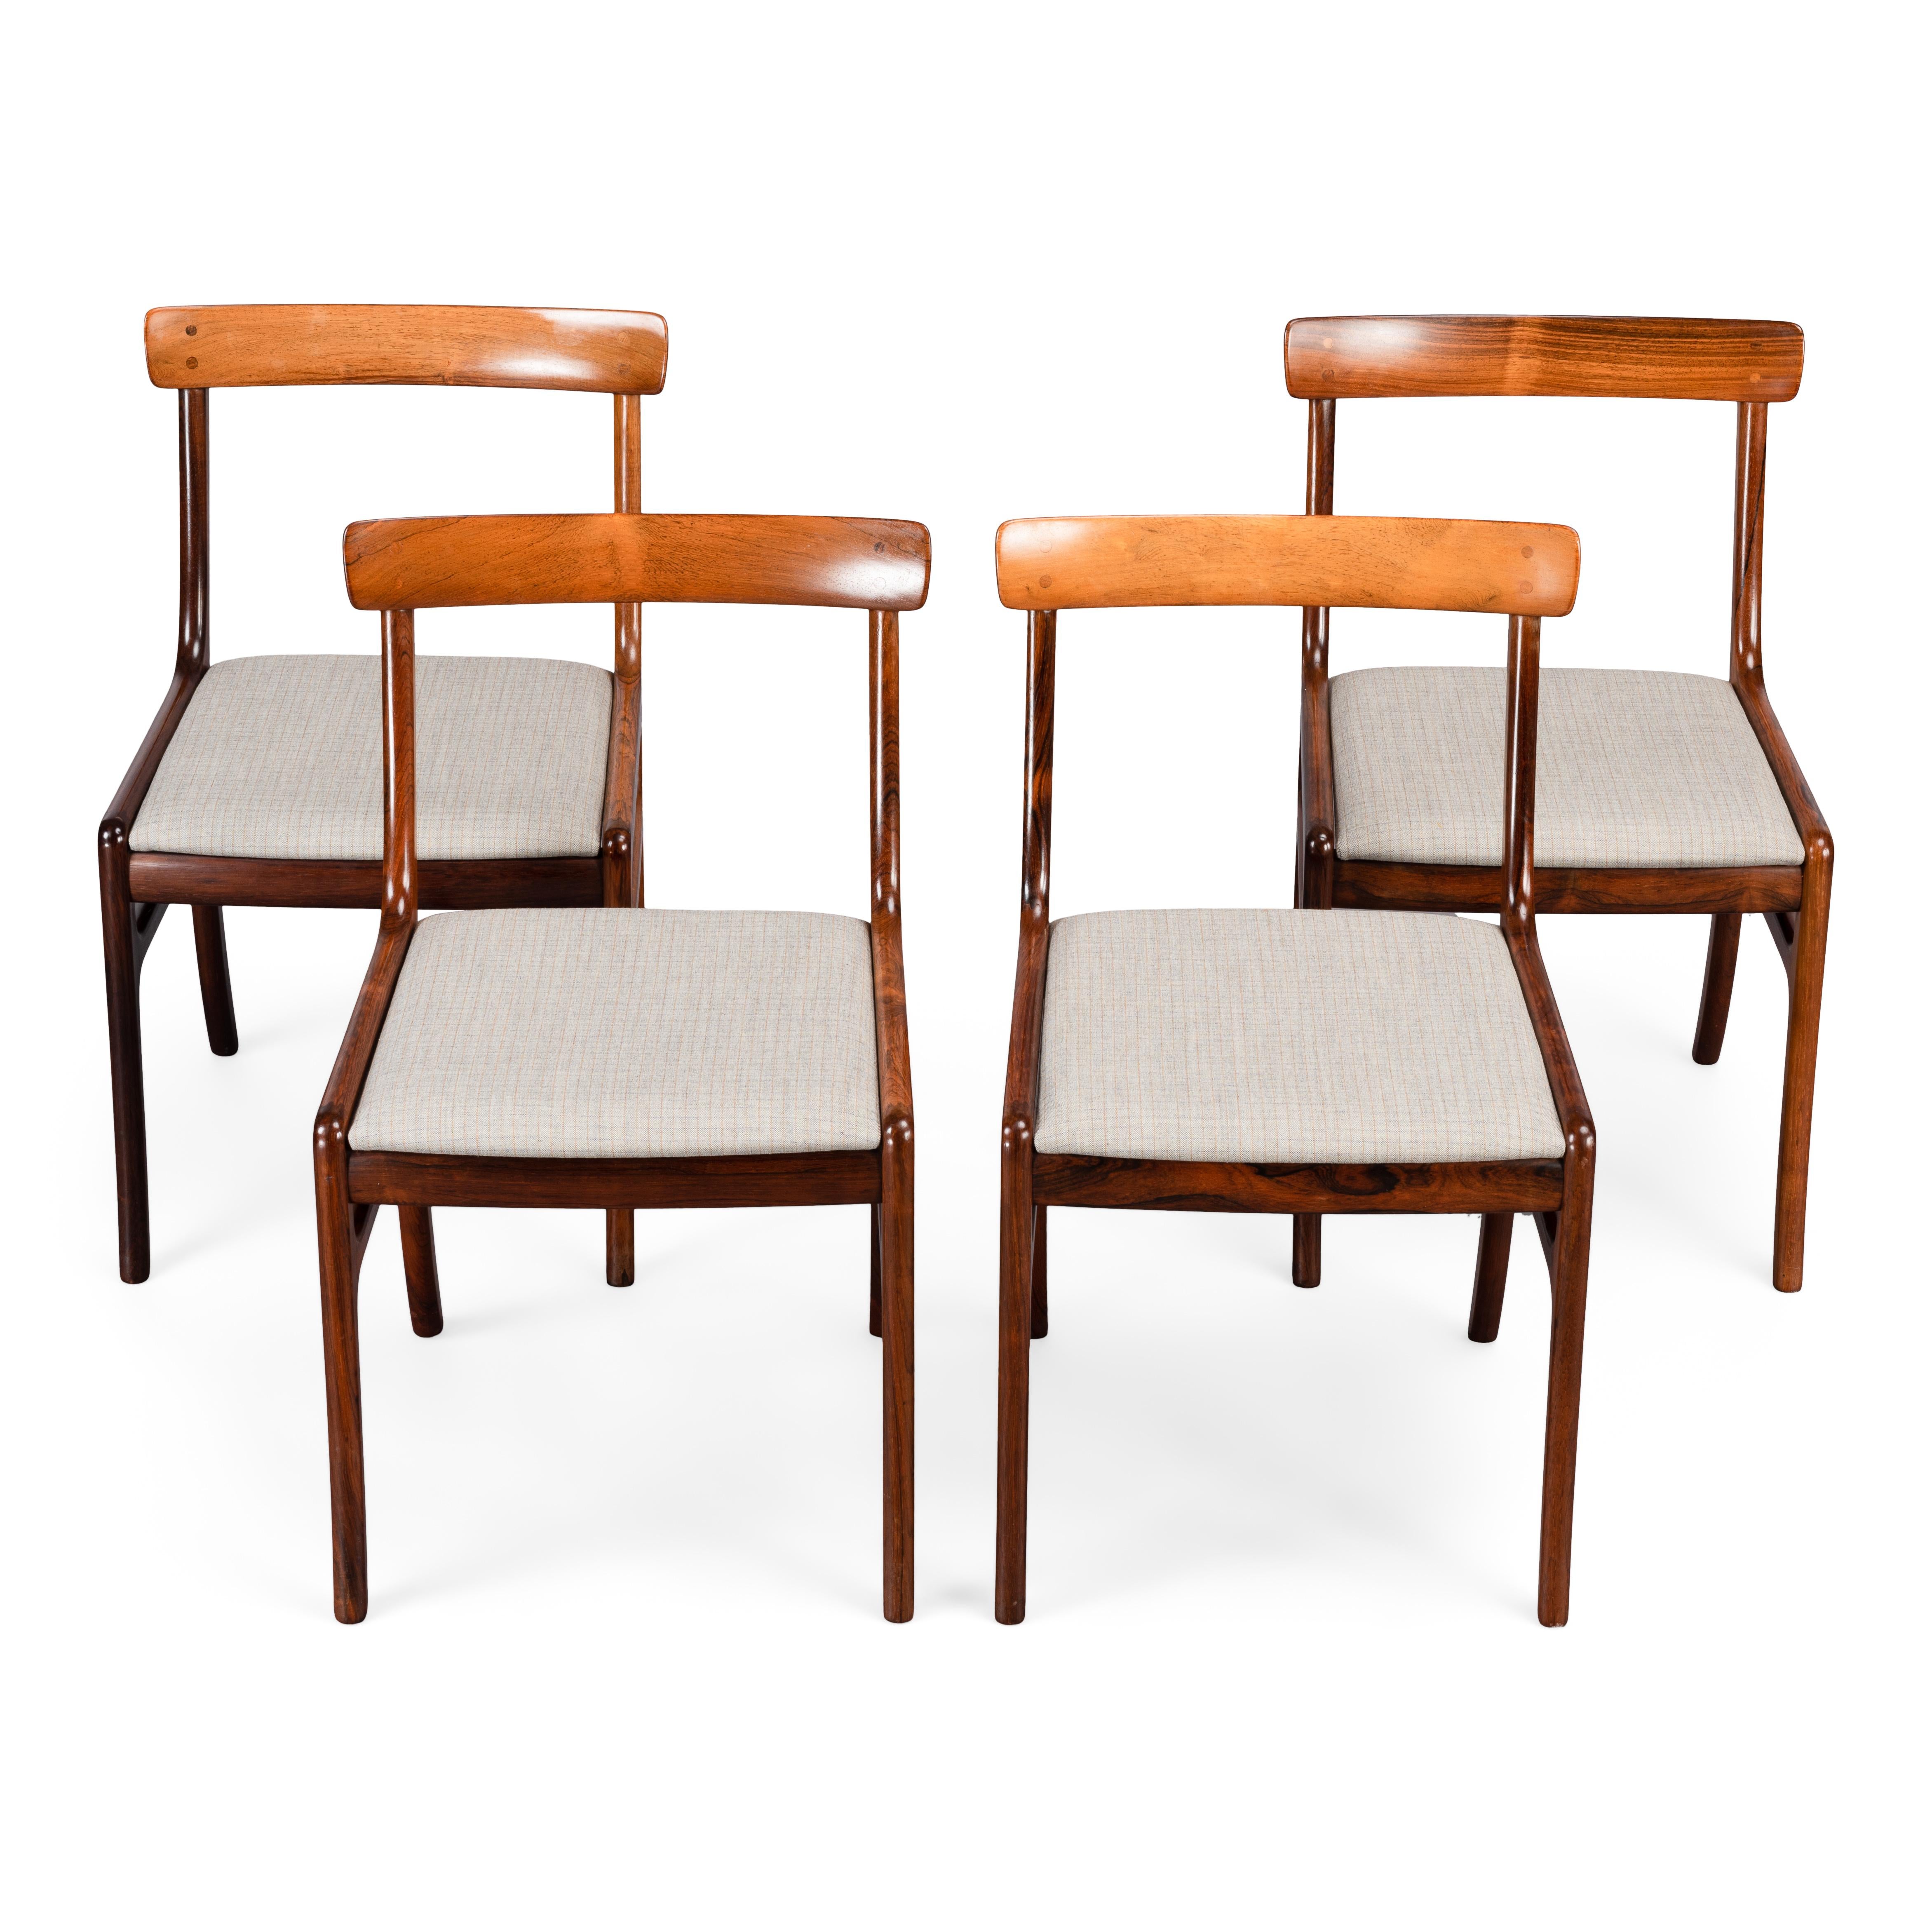 Mid-20th Century Rosewood Rungstedlund Dining Chairs by Ole Wanscher for PJ Denmark, Set of 4